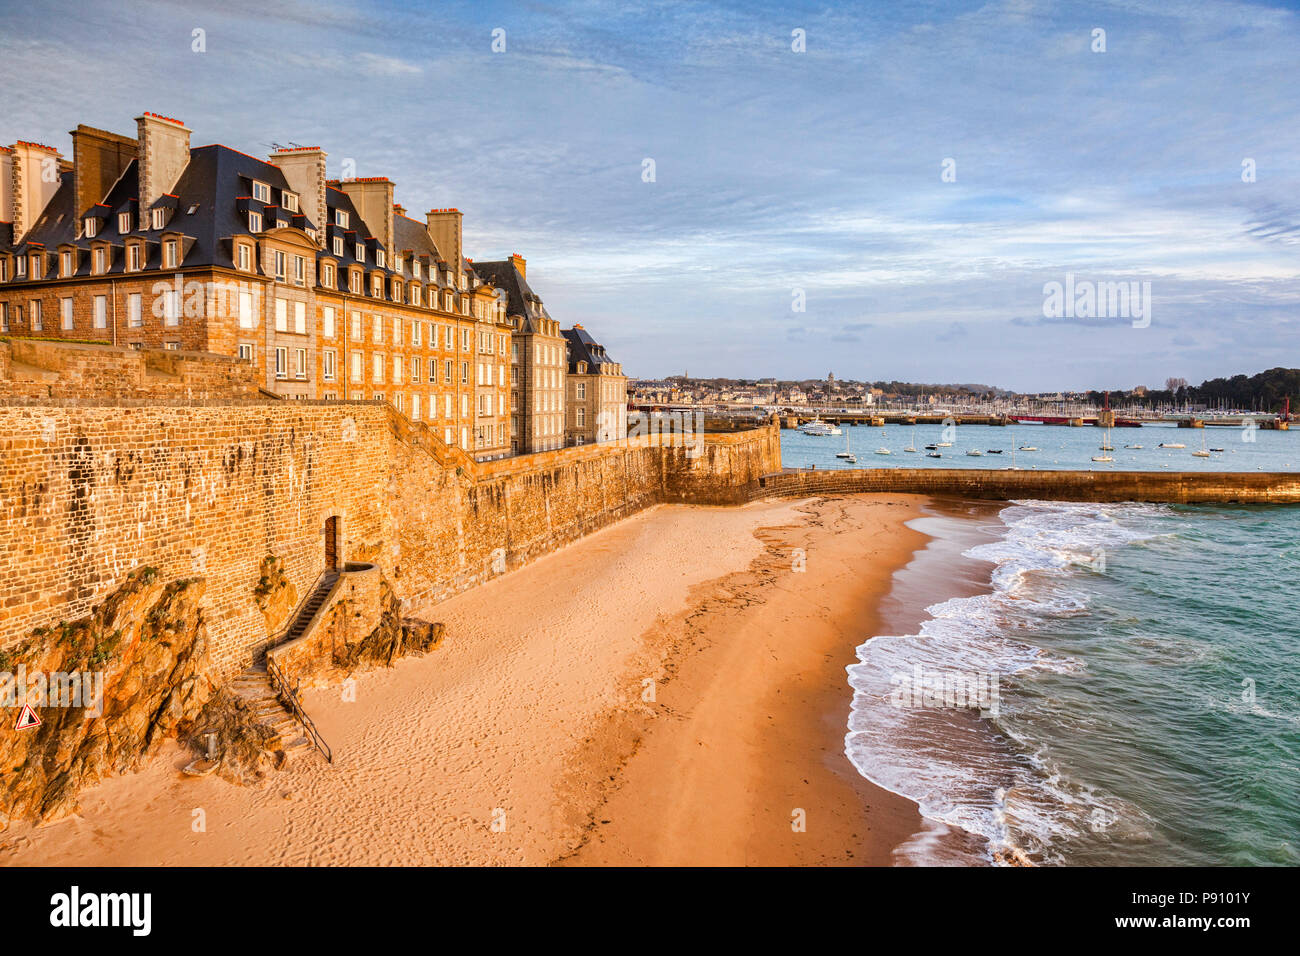 Saint-Malo, Brittany, France, and its beach and harbour. Stock Photo